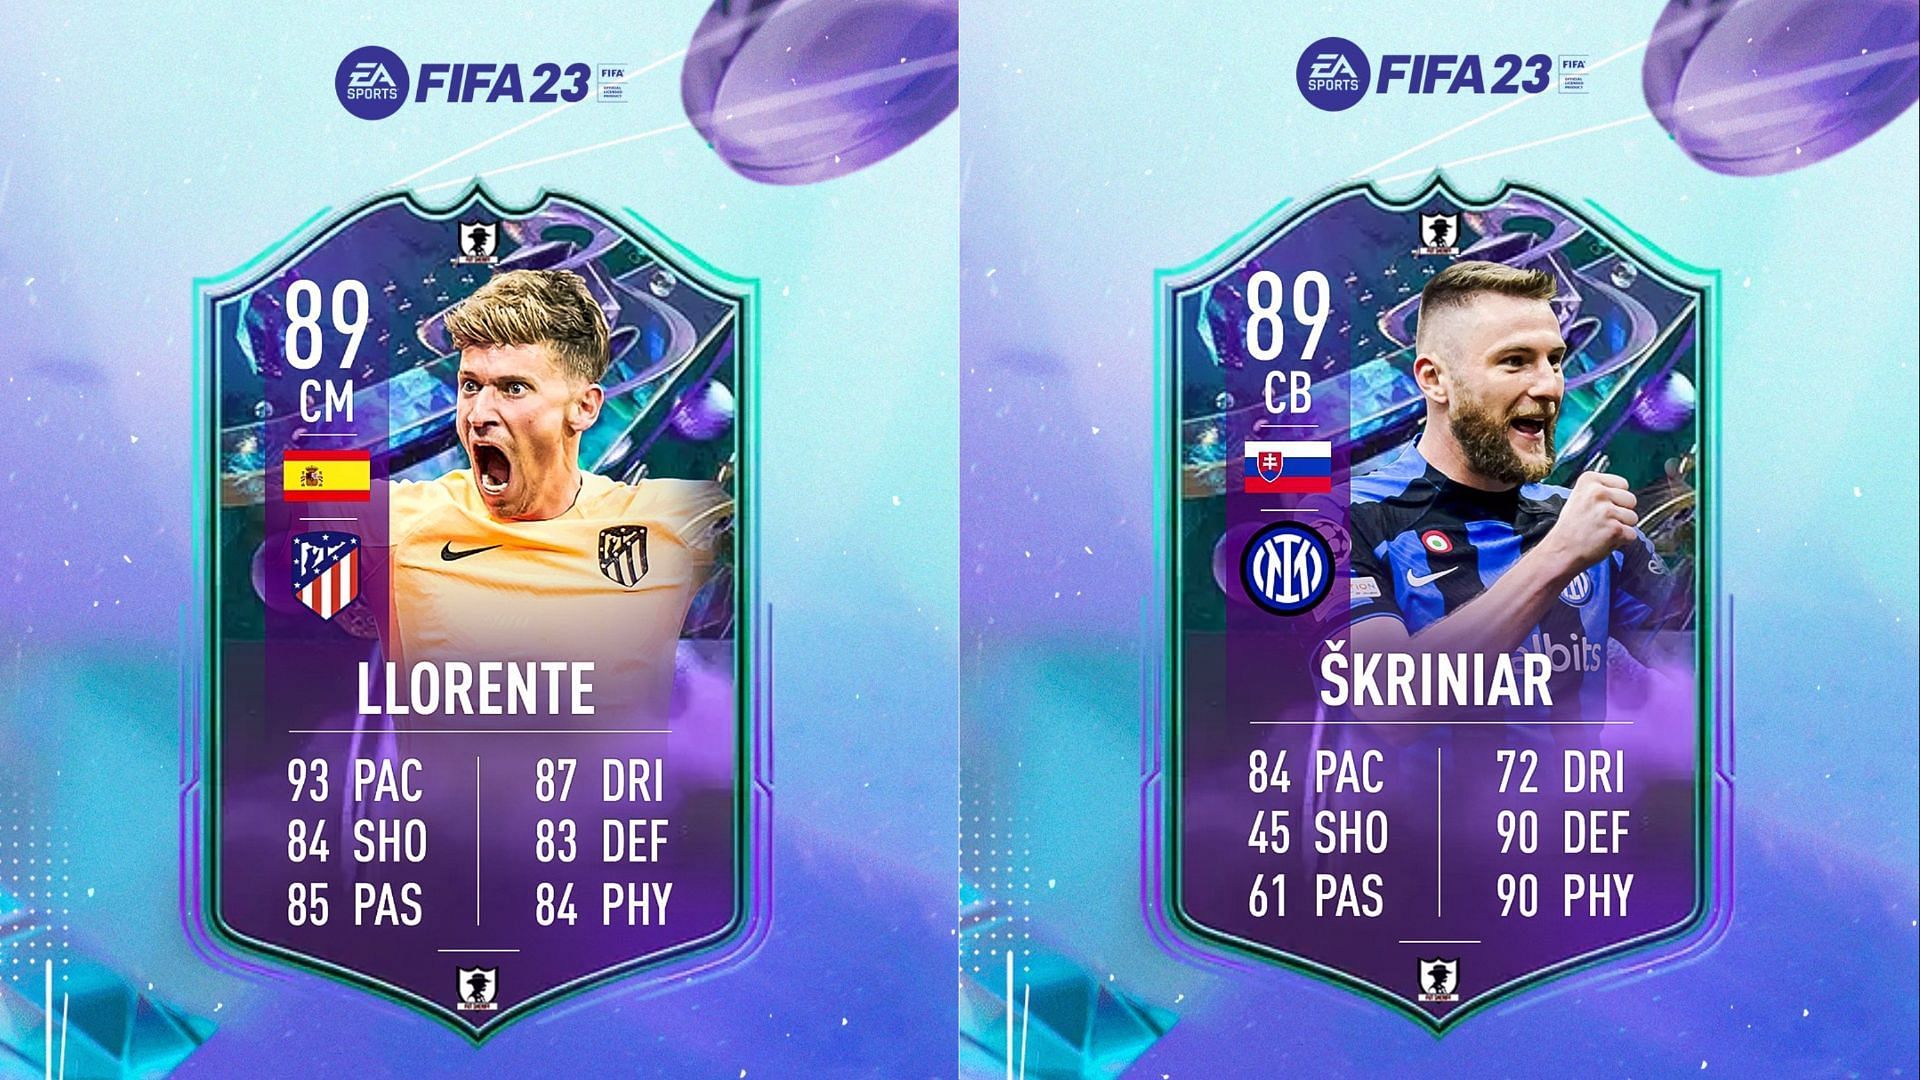 Marcos Llorente and Milan Skriniar will finally get promo cards once FIFA 23 Fantasy FUT begins (Images via Twitter/FUT Sheriff)